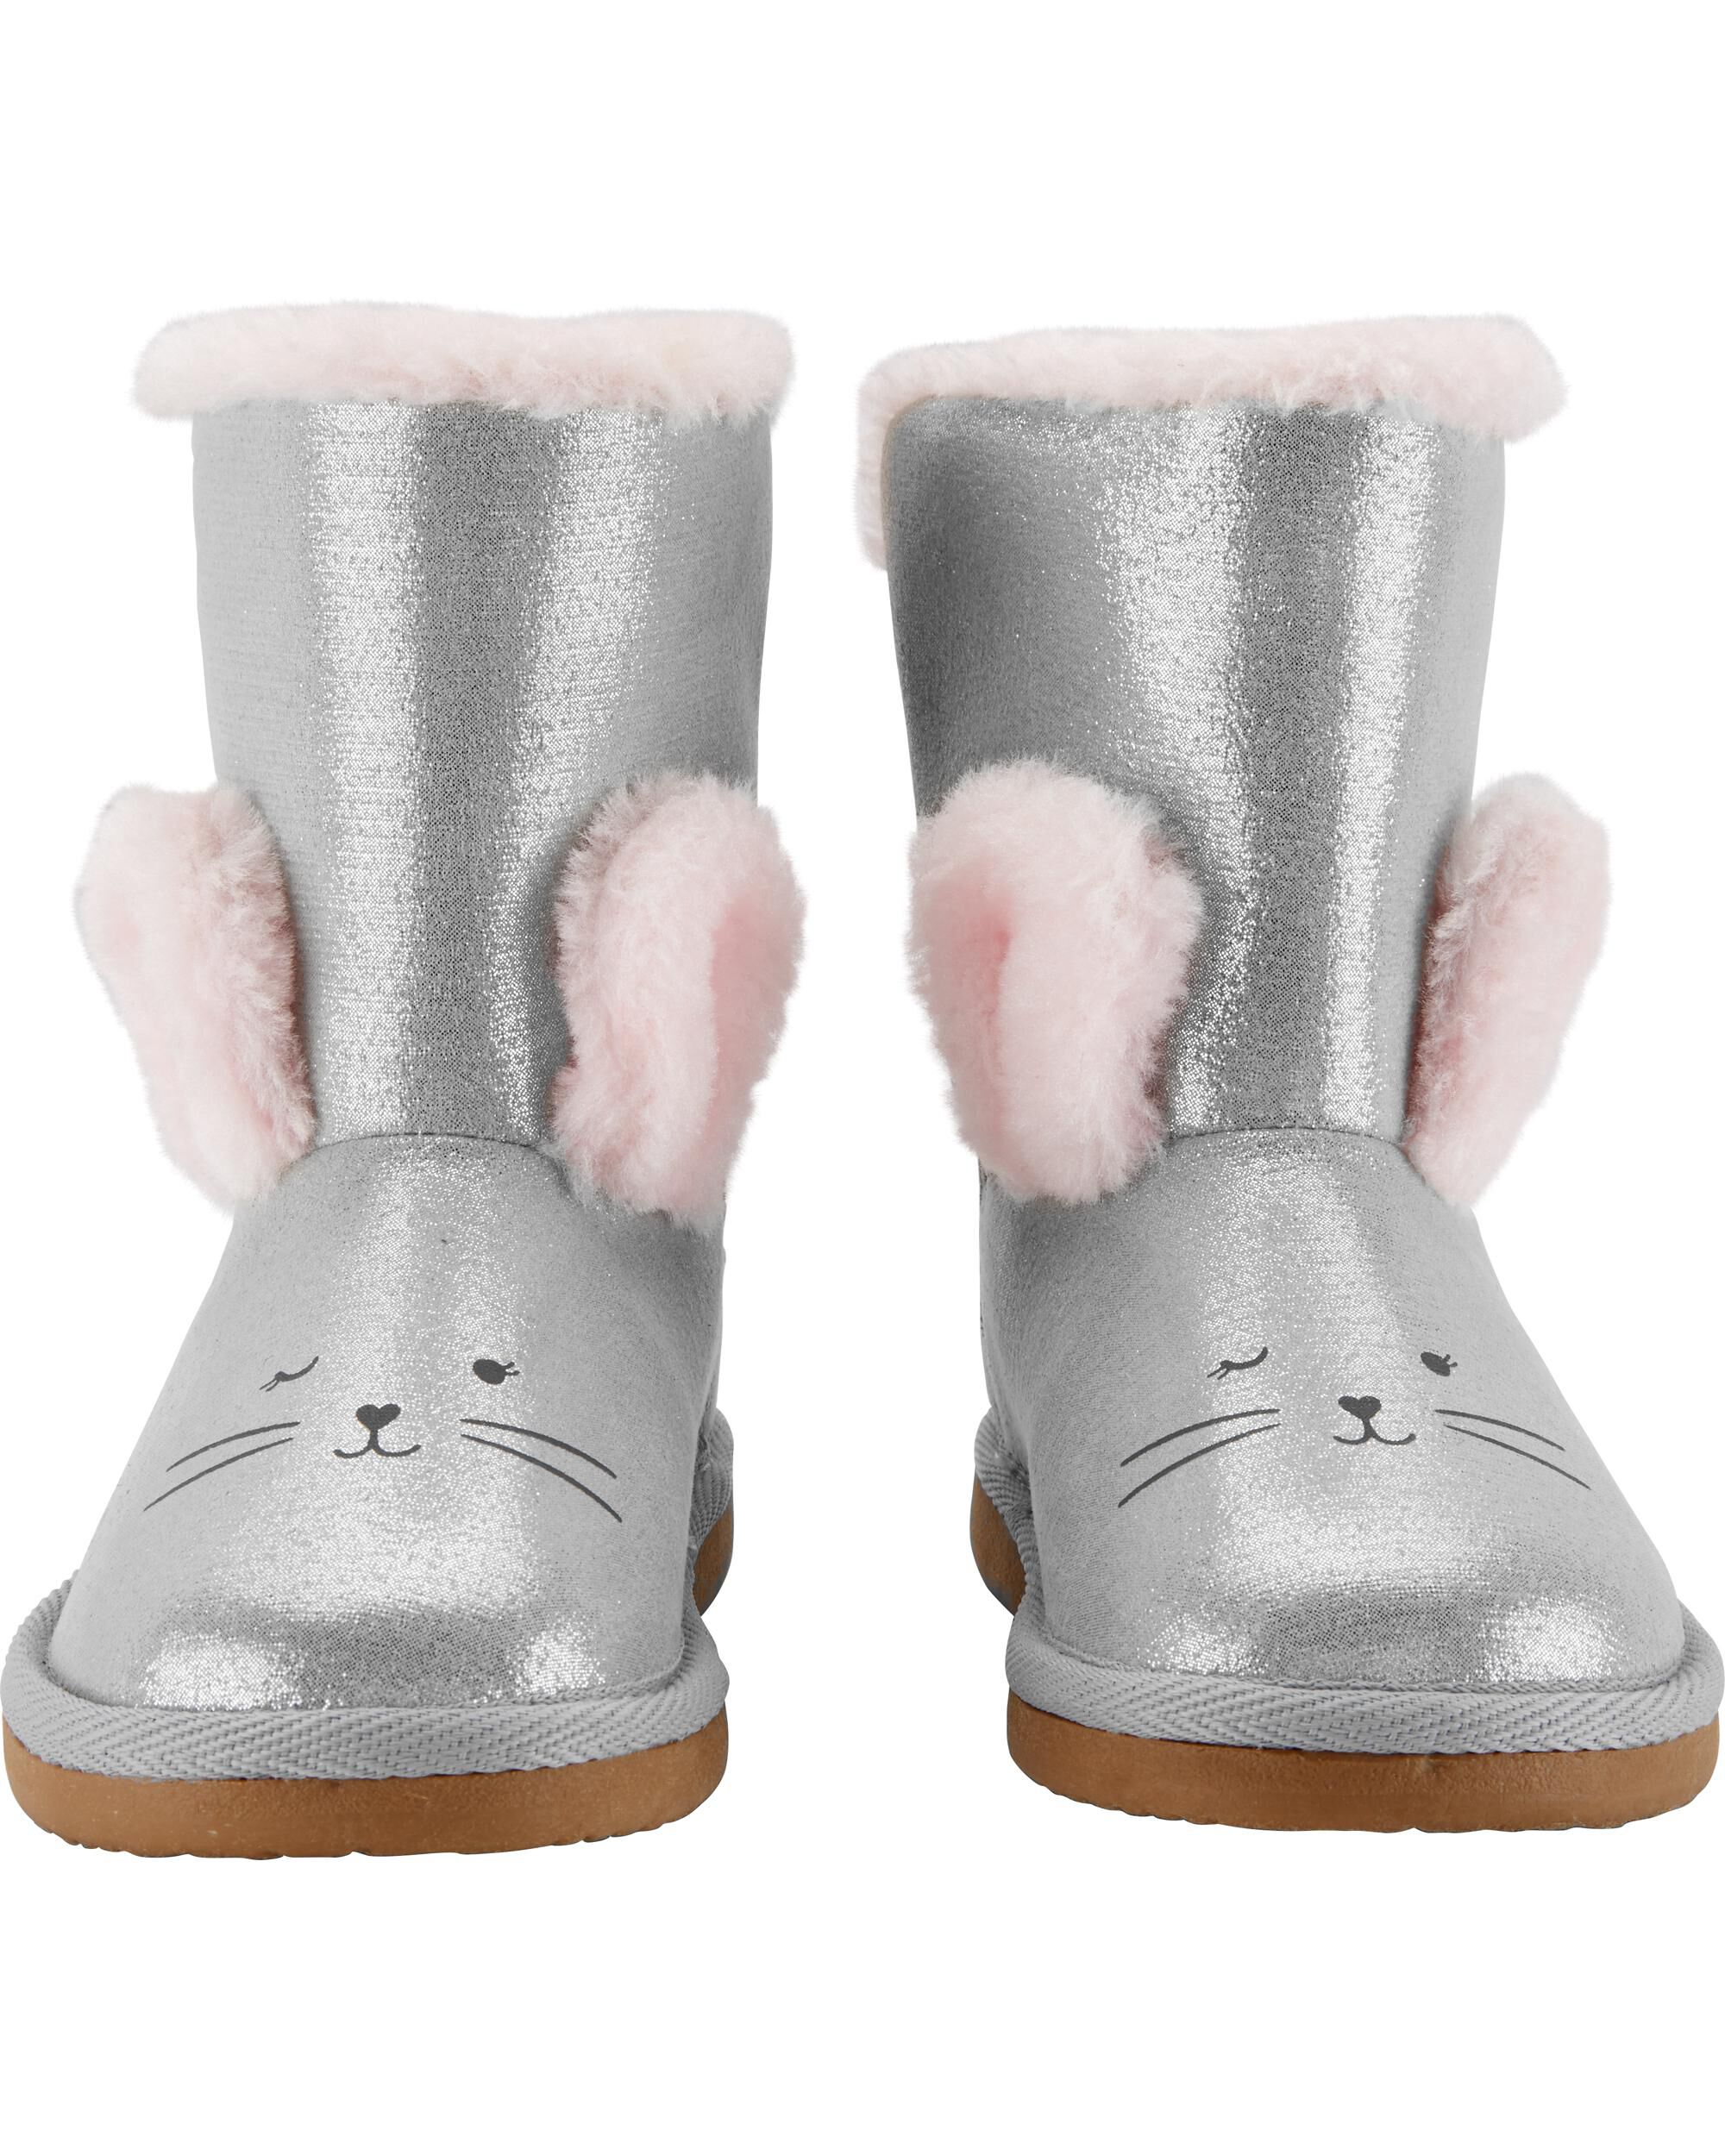 carters bunny shoes